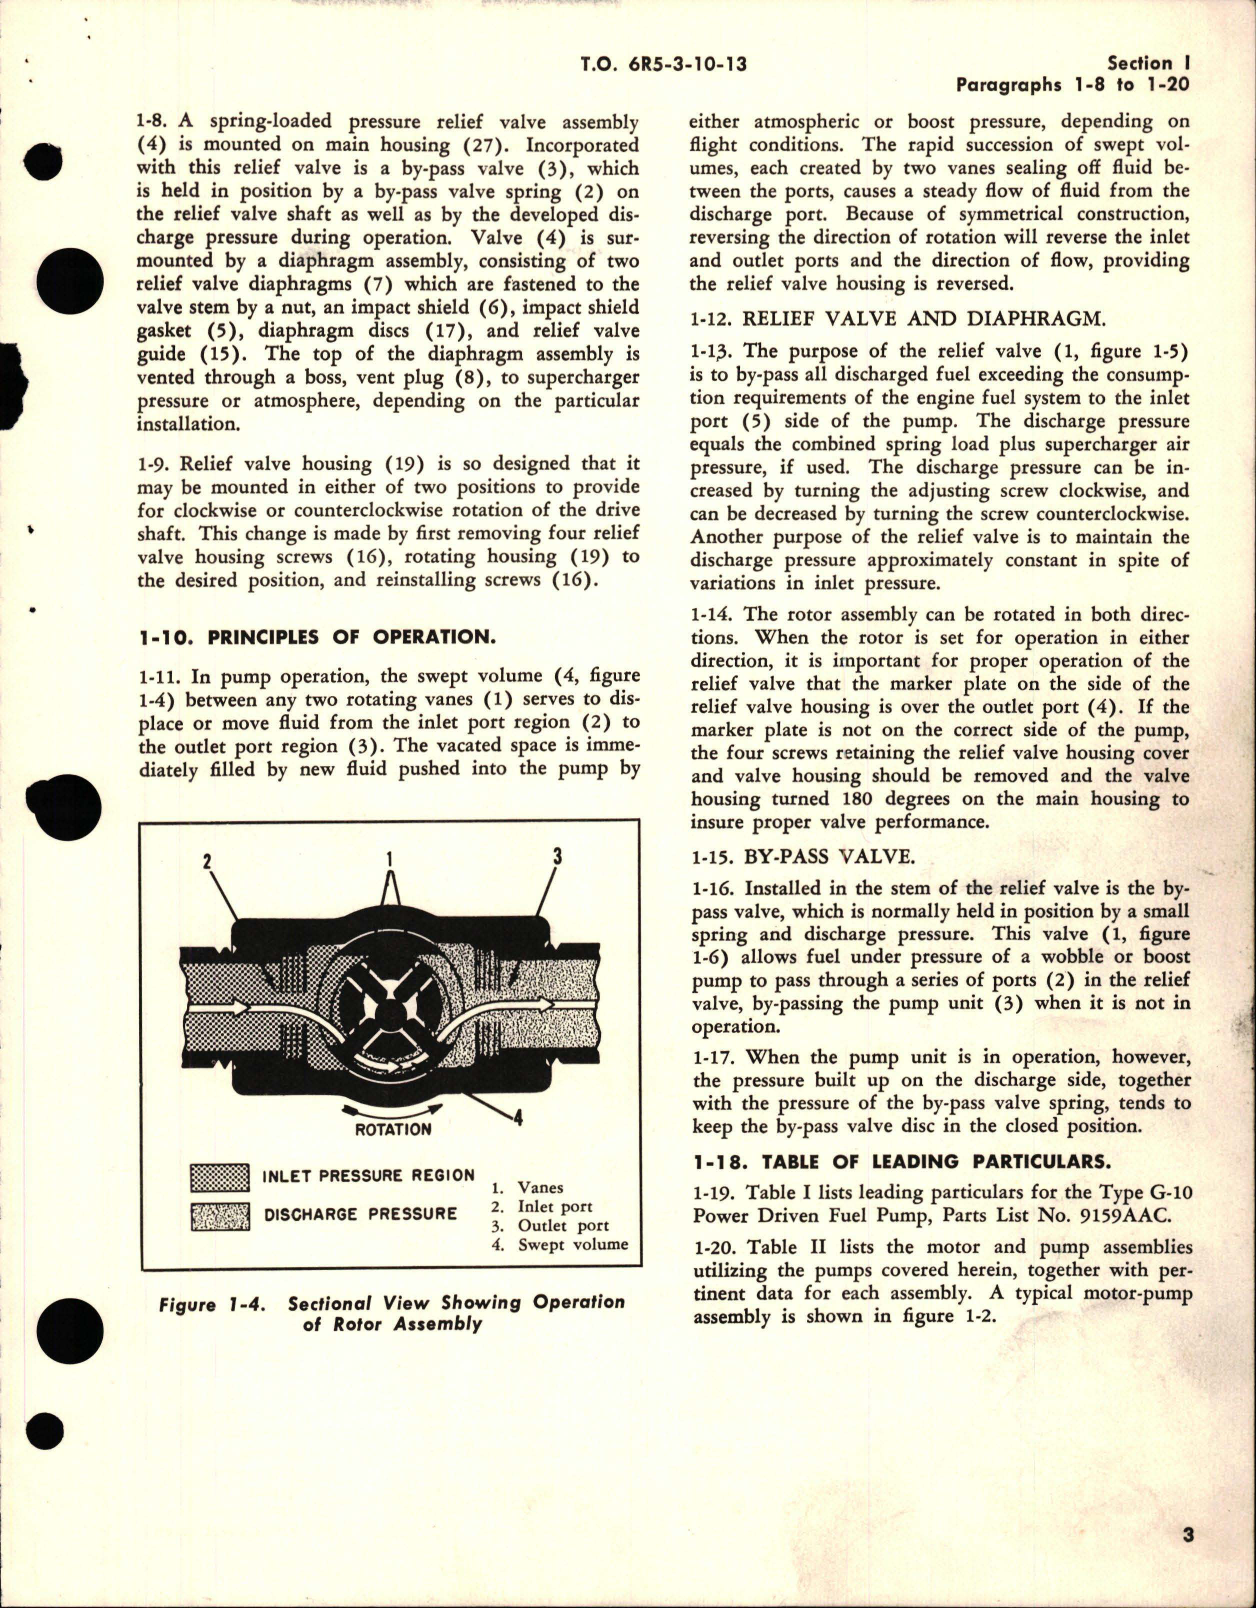 Sample page 7 from AirCorps Library document: Overhaul Instructions for Fuel and Water Pumps - Types A-1, A-2, F-10, G-6, G-9, and G-10